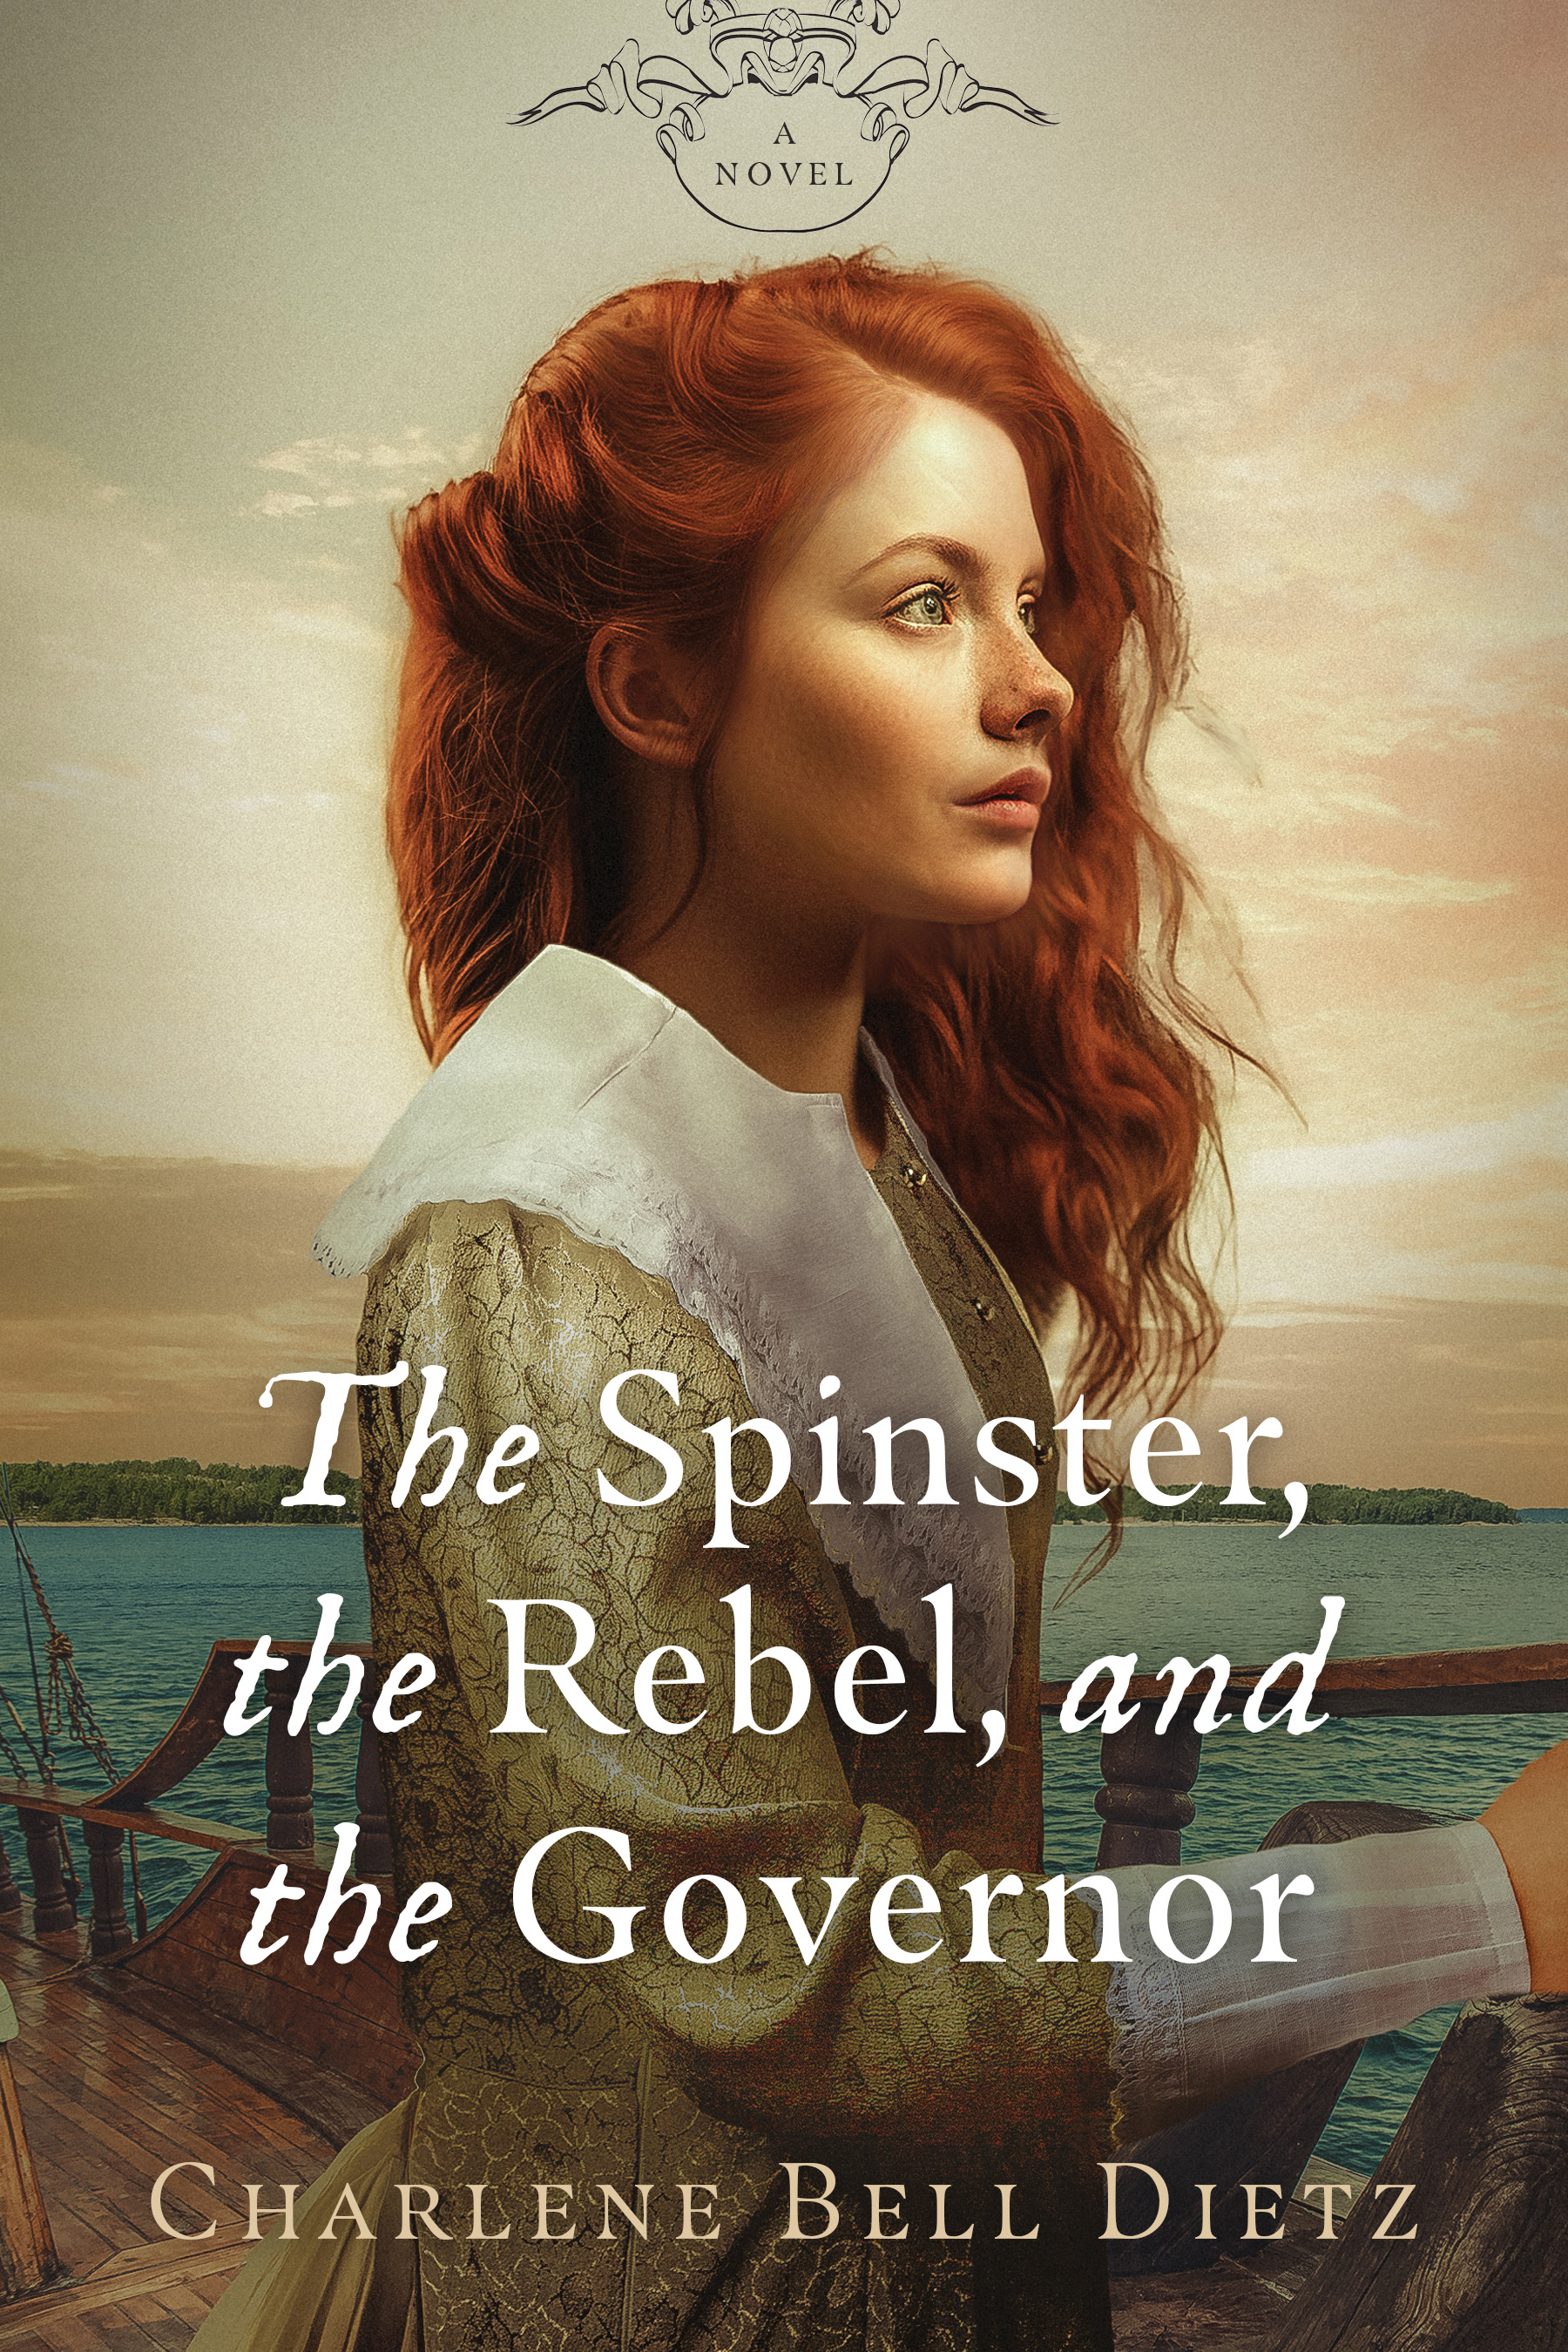 The SPinster, the Rebel, and the Governor